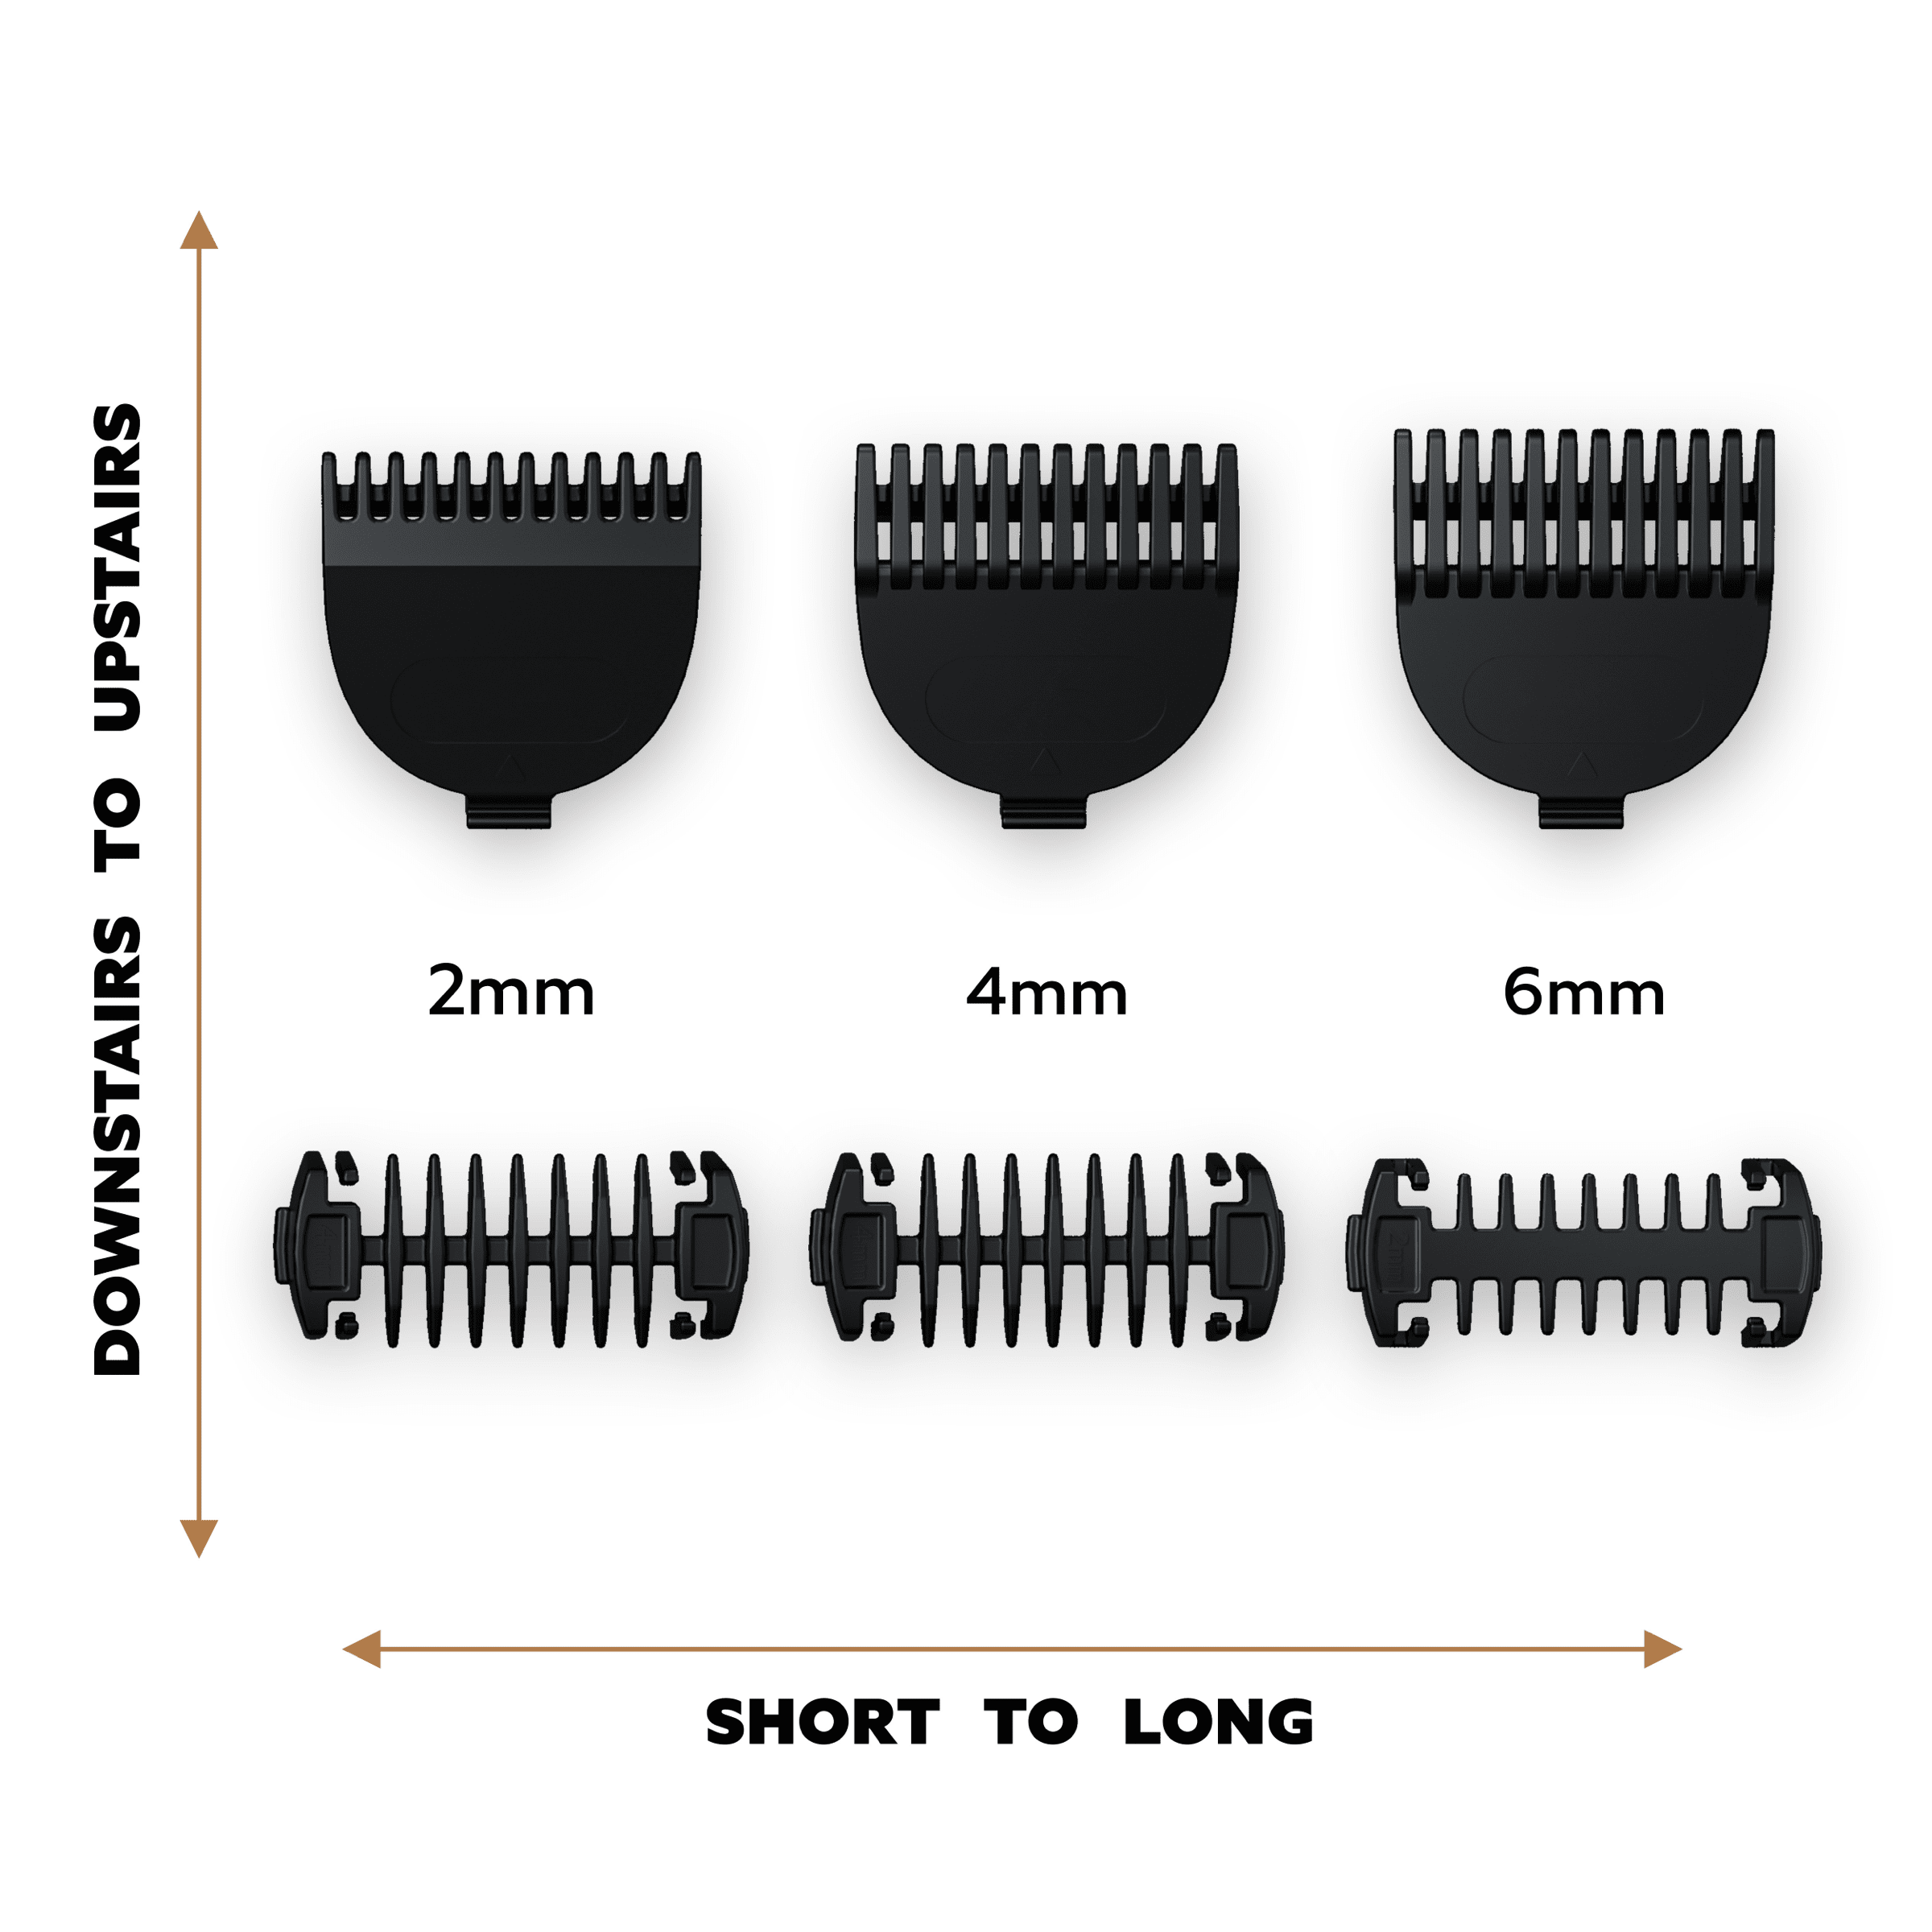 Dollar Shave Club Double Header Electric Trimmer Body Head Replacement comes with blades in size 2mm, 4mm, and 6mm.